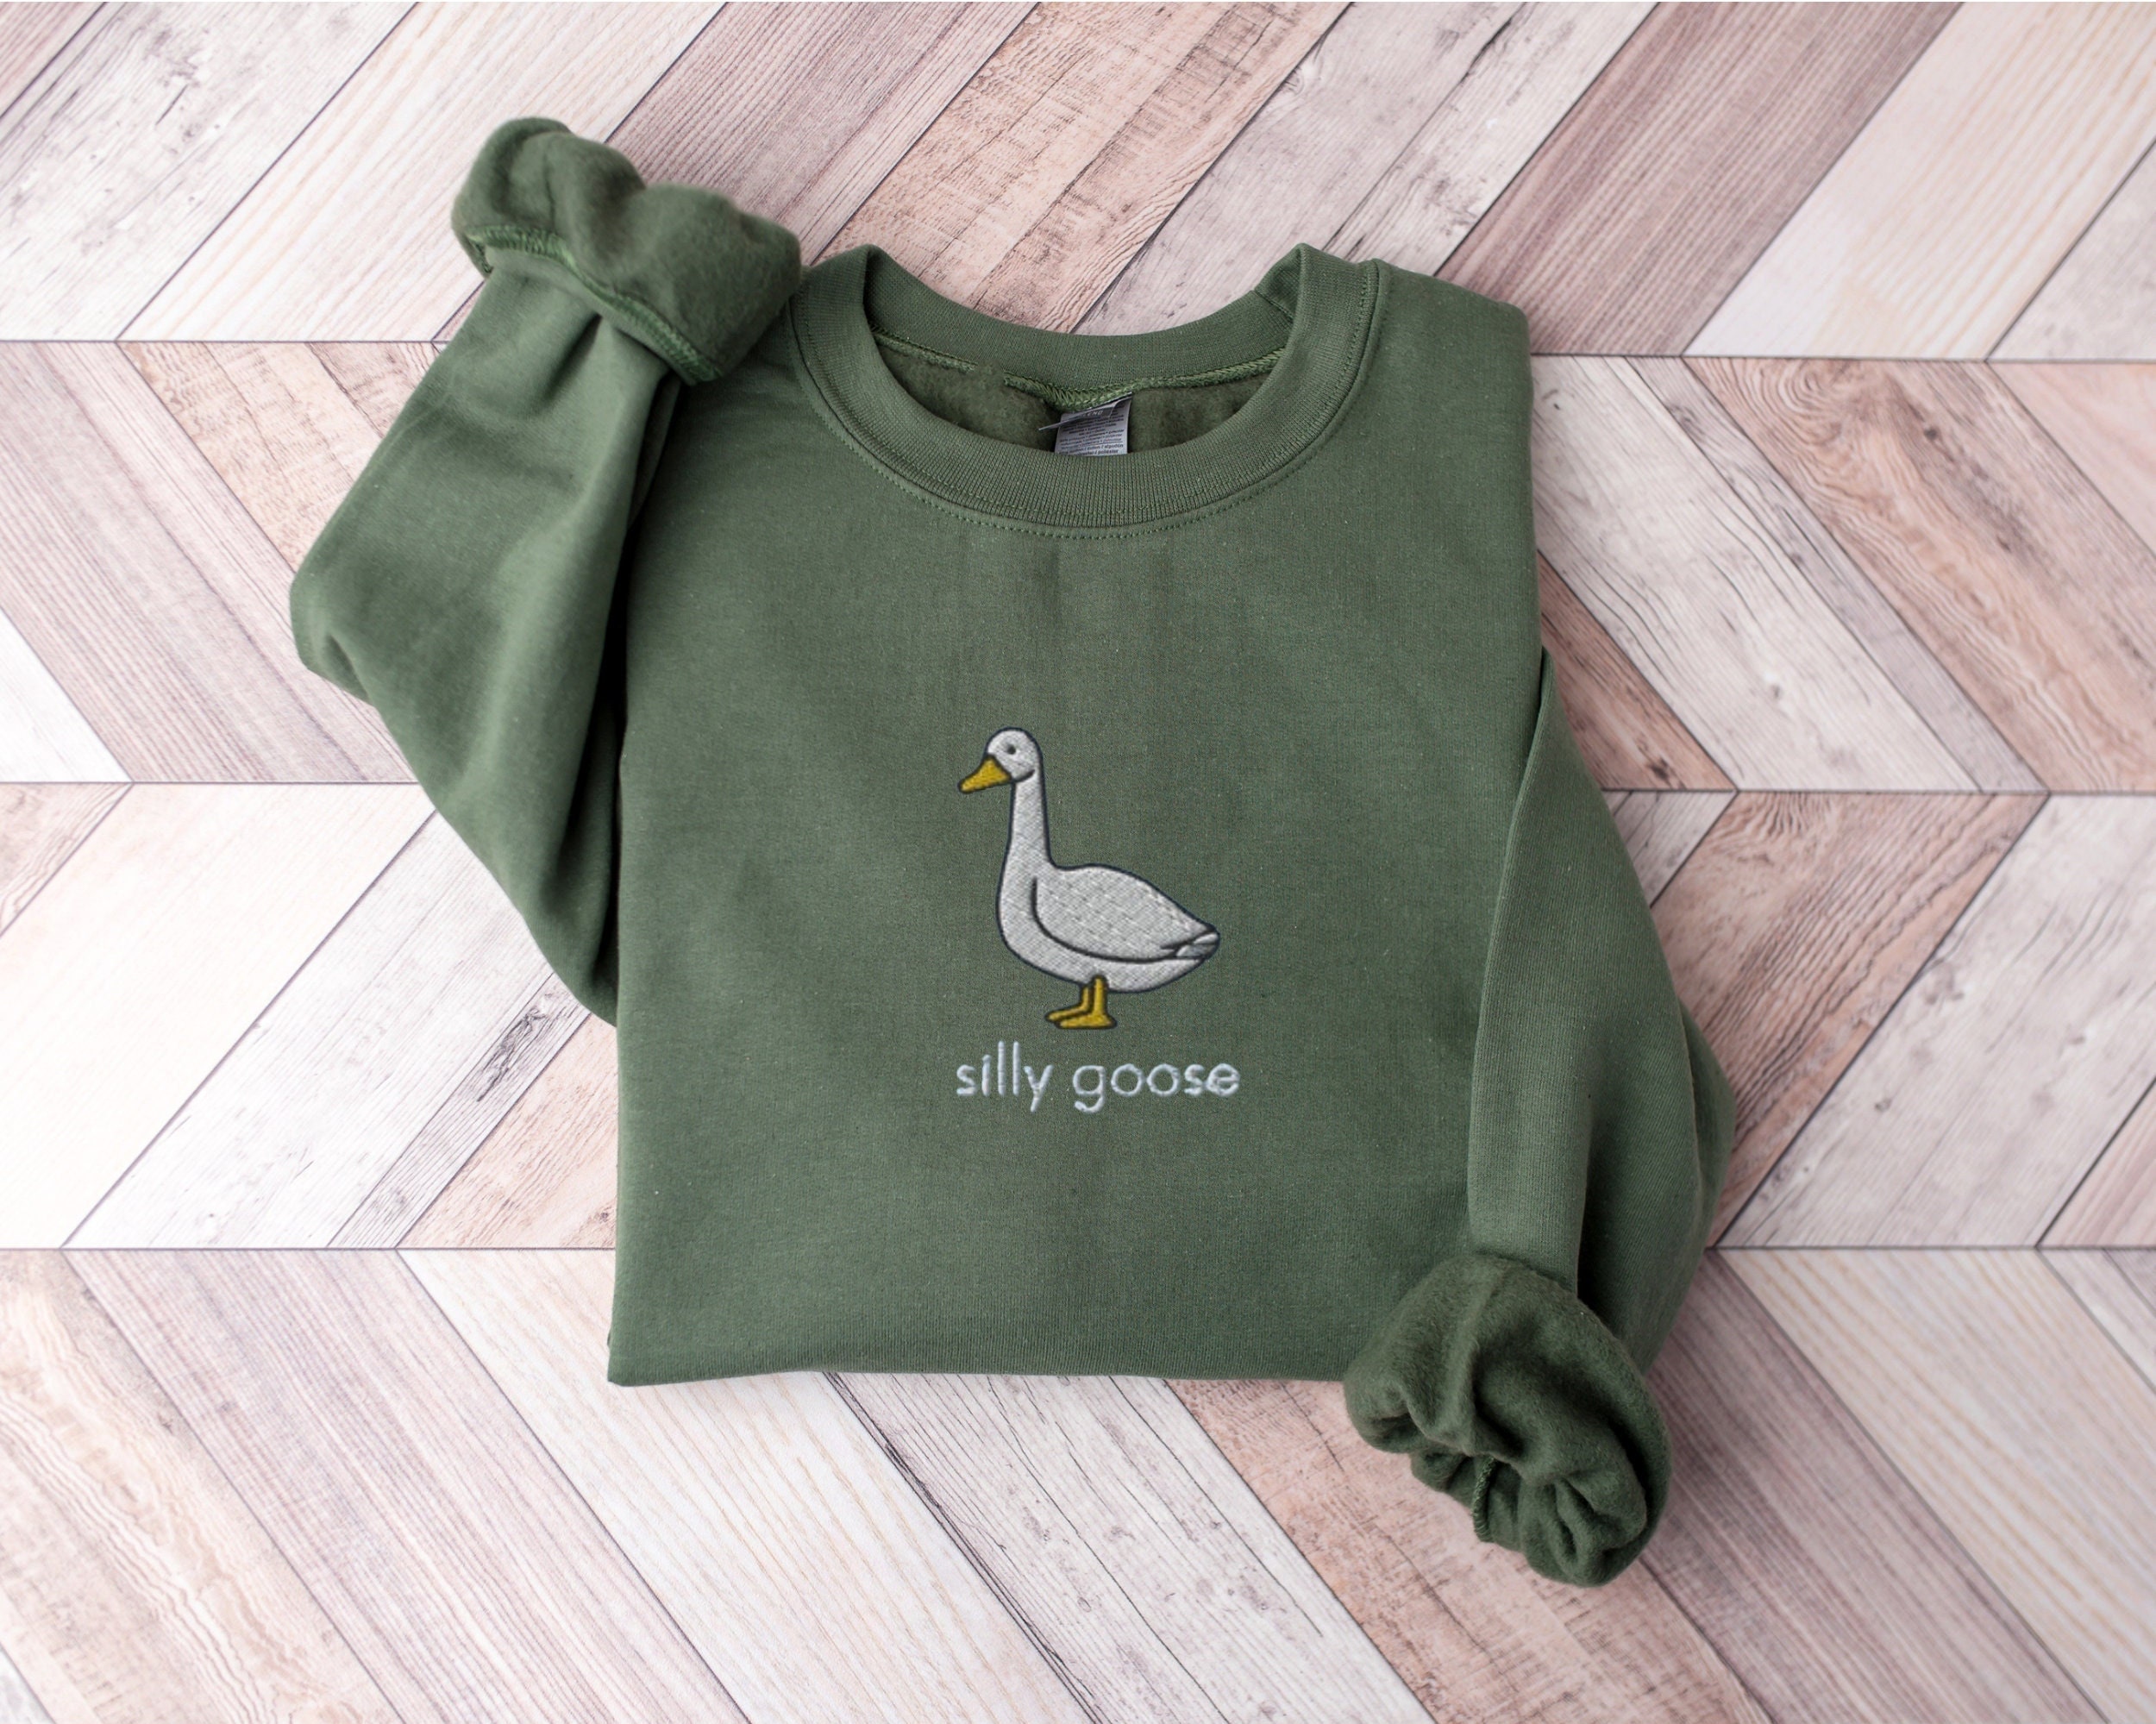 Discover Embroidered Silly Goose Sweatshirt, Silly Goose Sweatshirt, Silly Goose Embroidered Sweatshirt